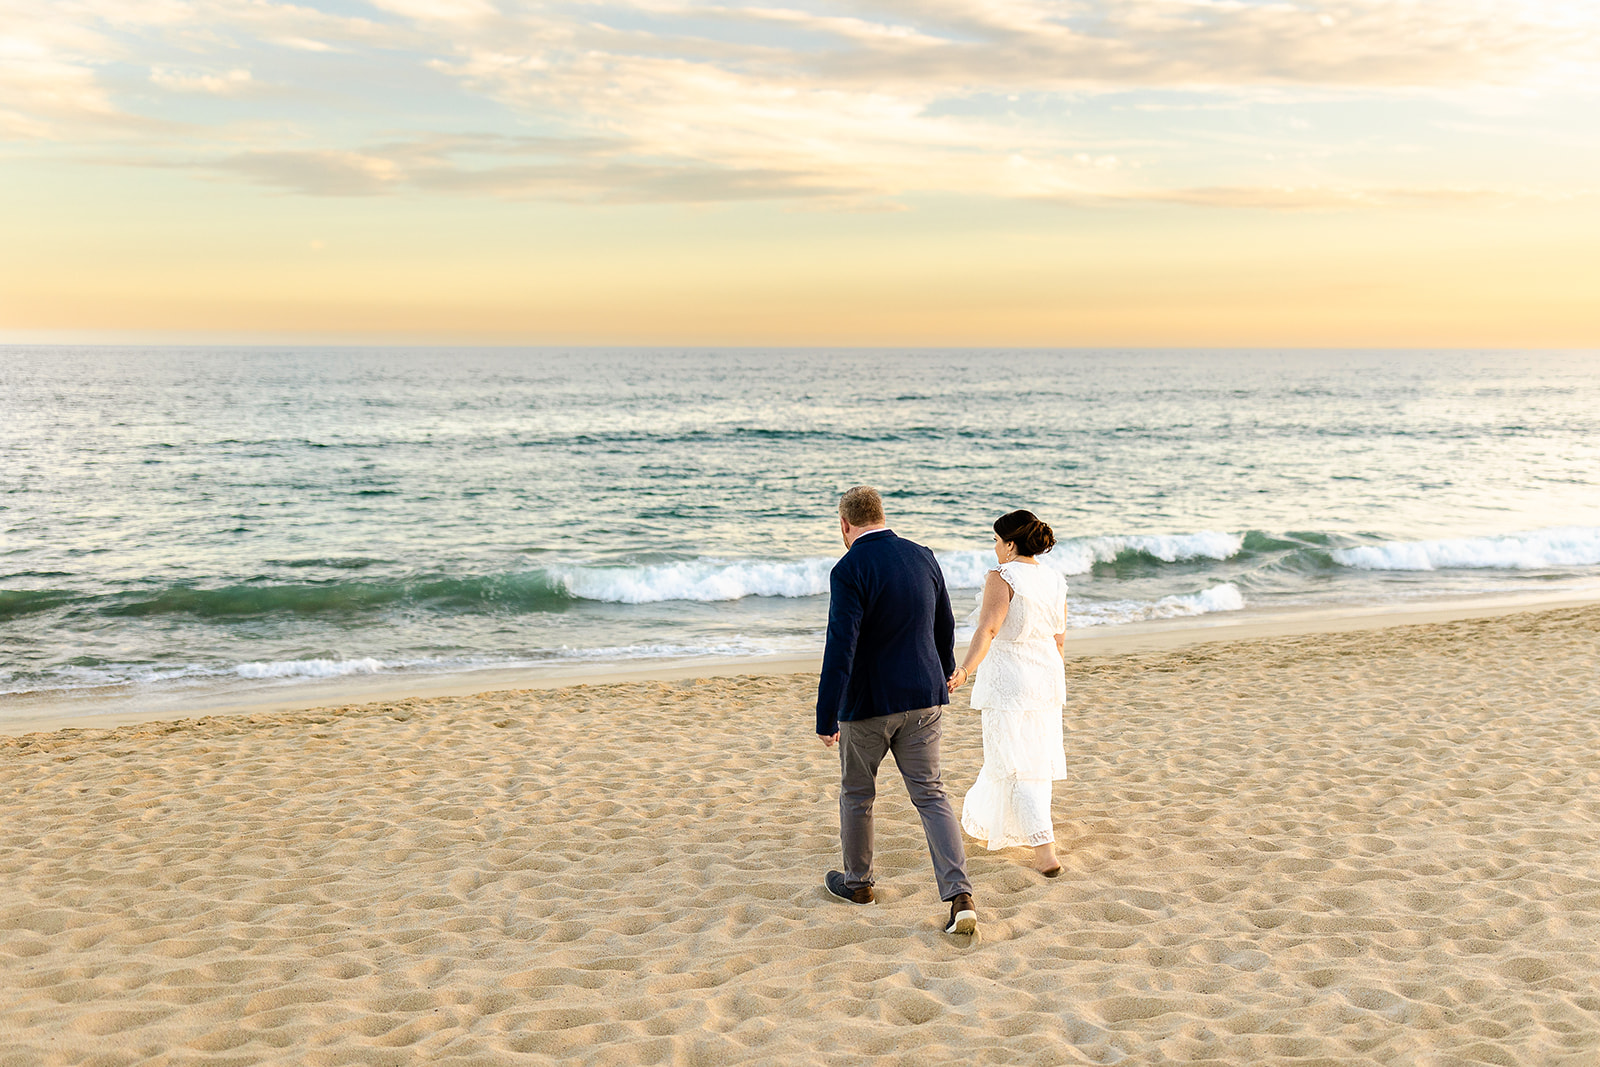 Couple holding hand and walking on the beach toward the ocean